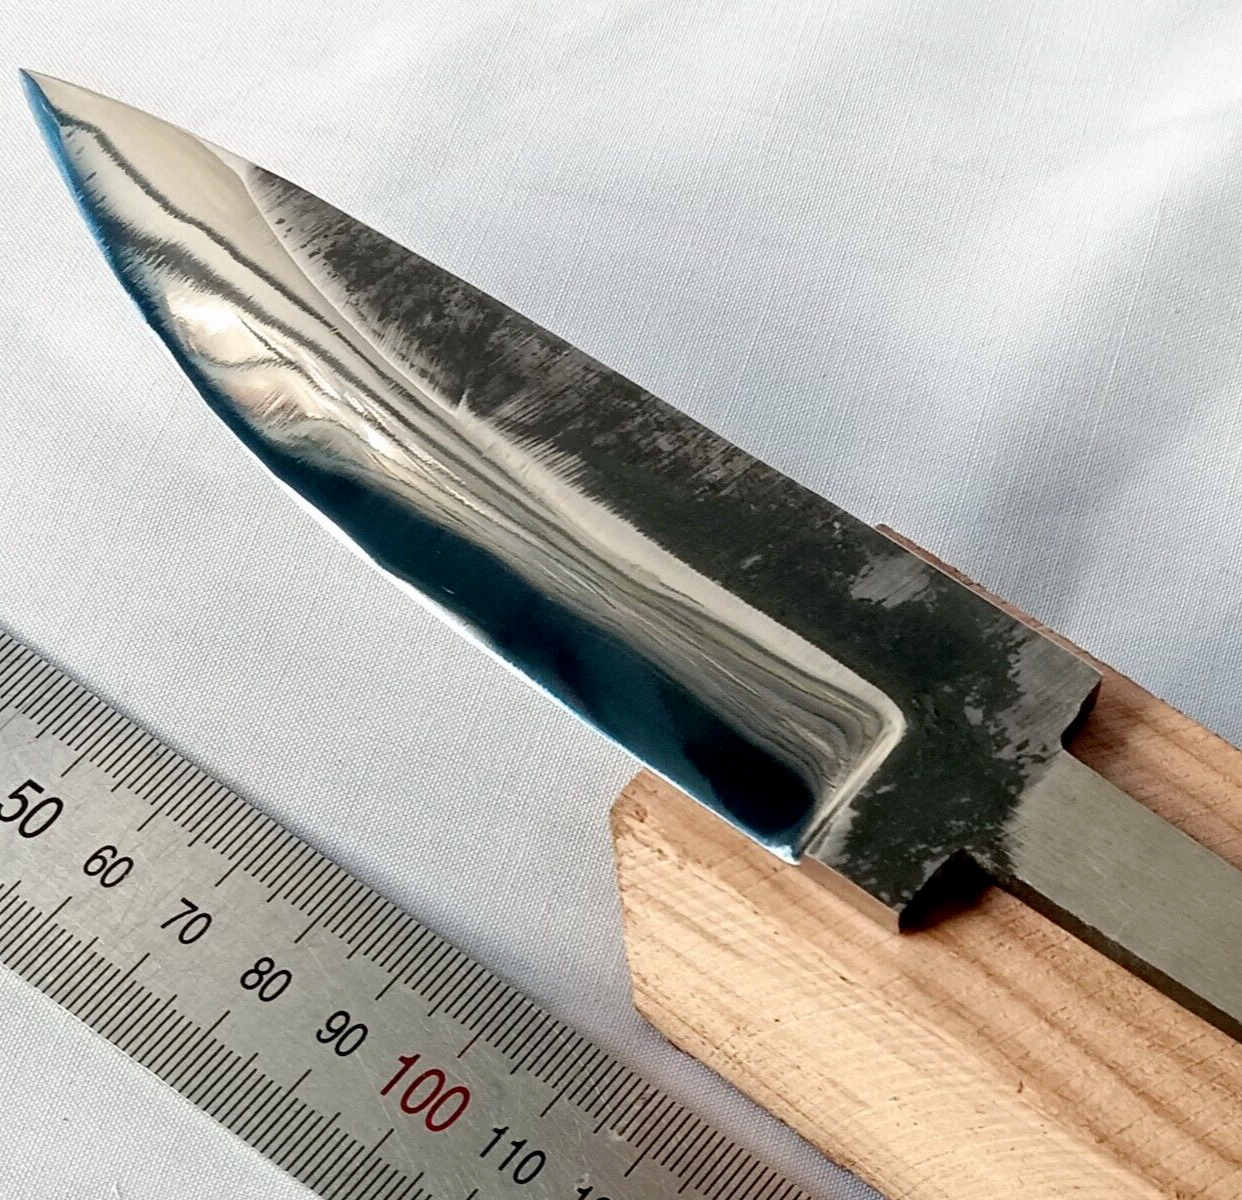 Blank Blade, Hand Forged Yakut Knife, Blank Blades, Carbon Steel, wood piece